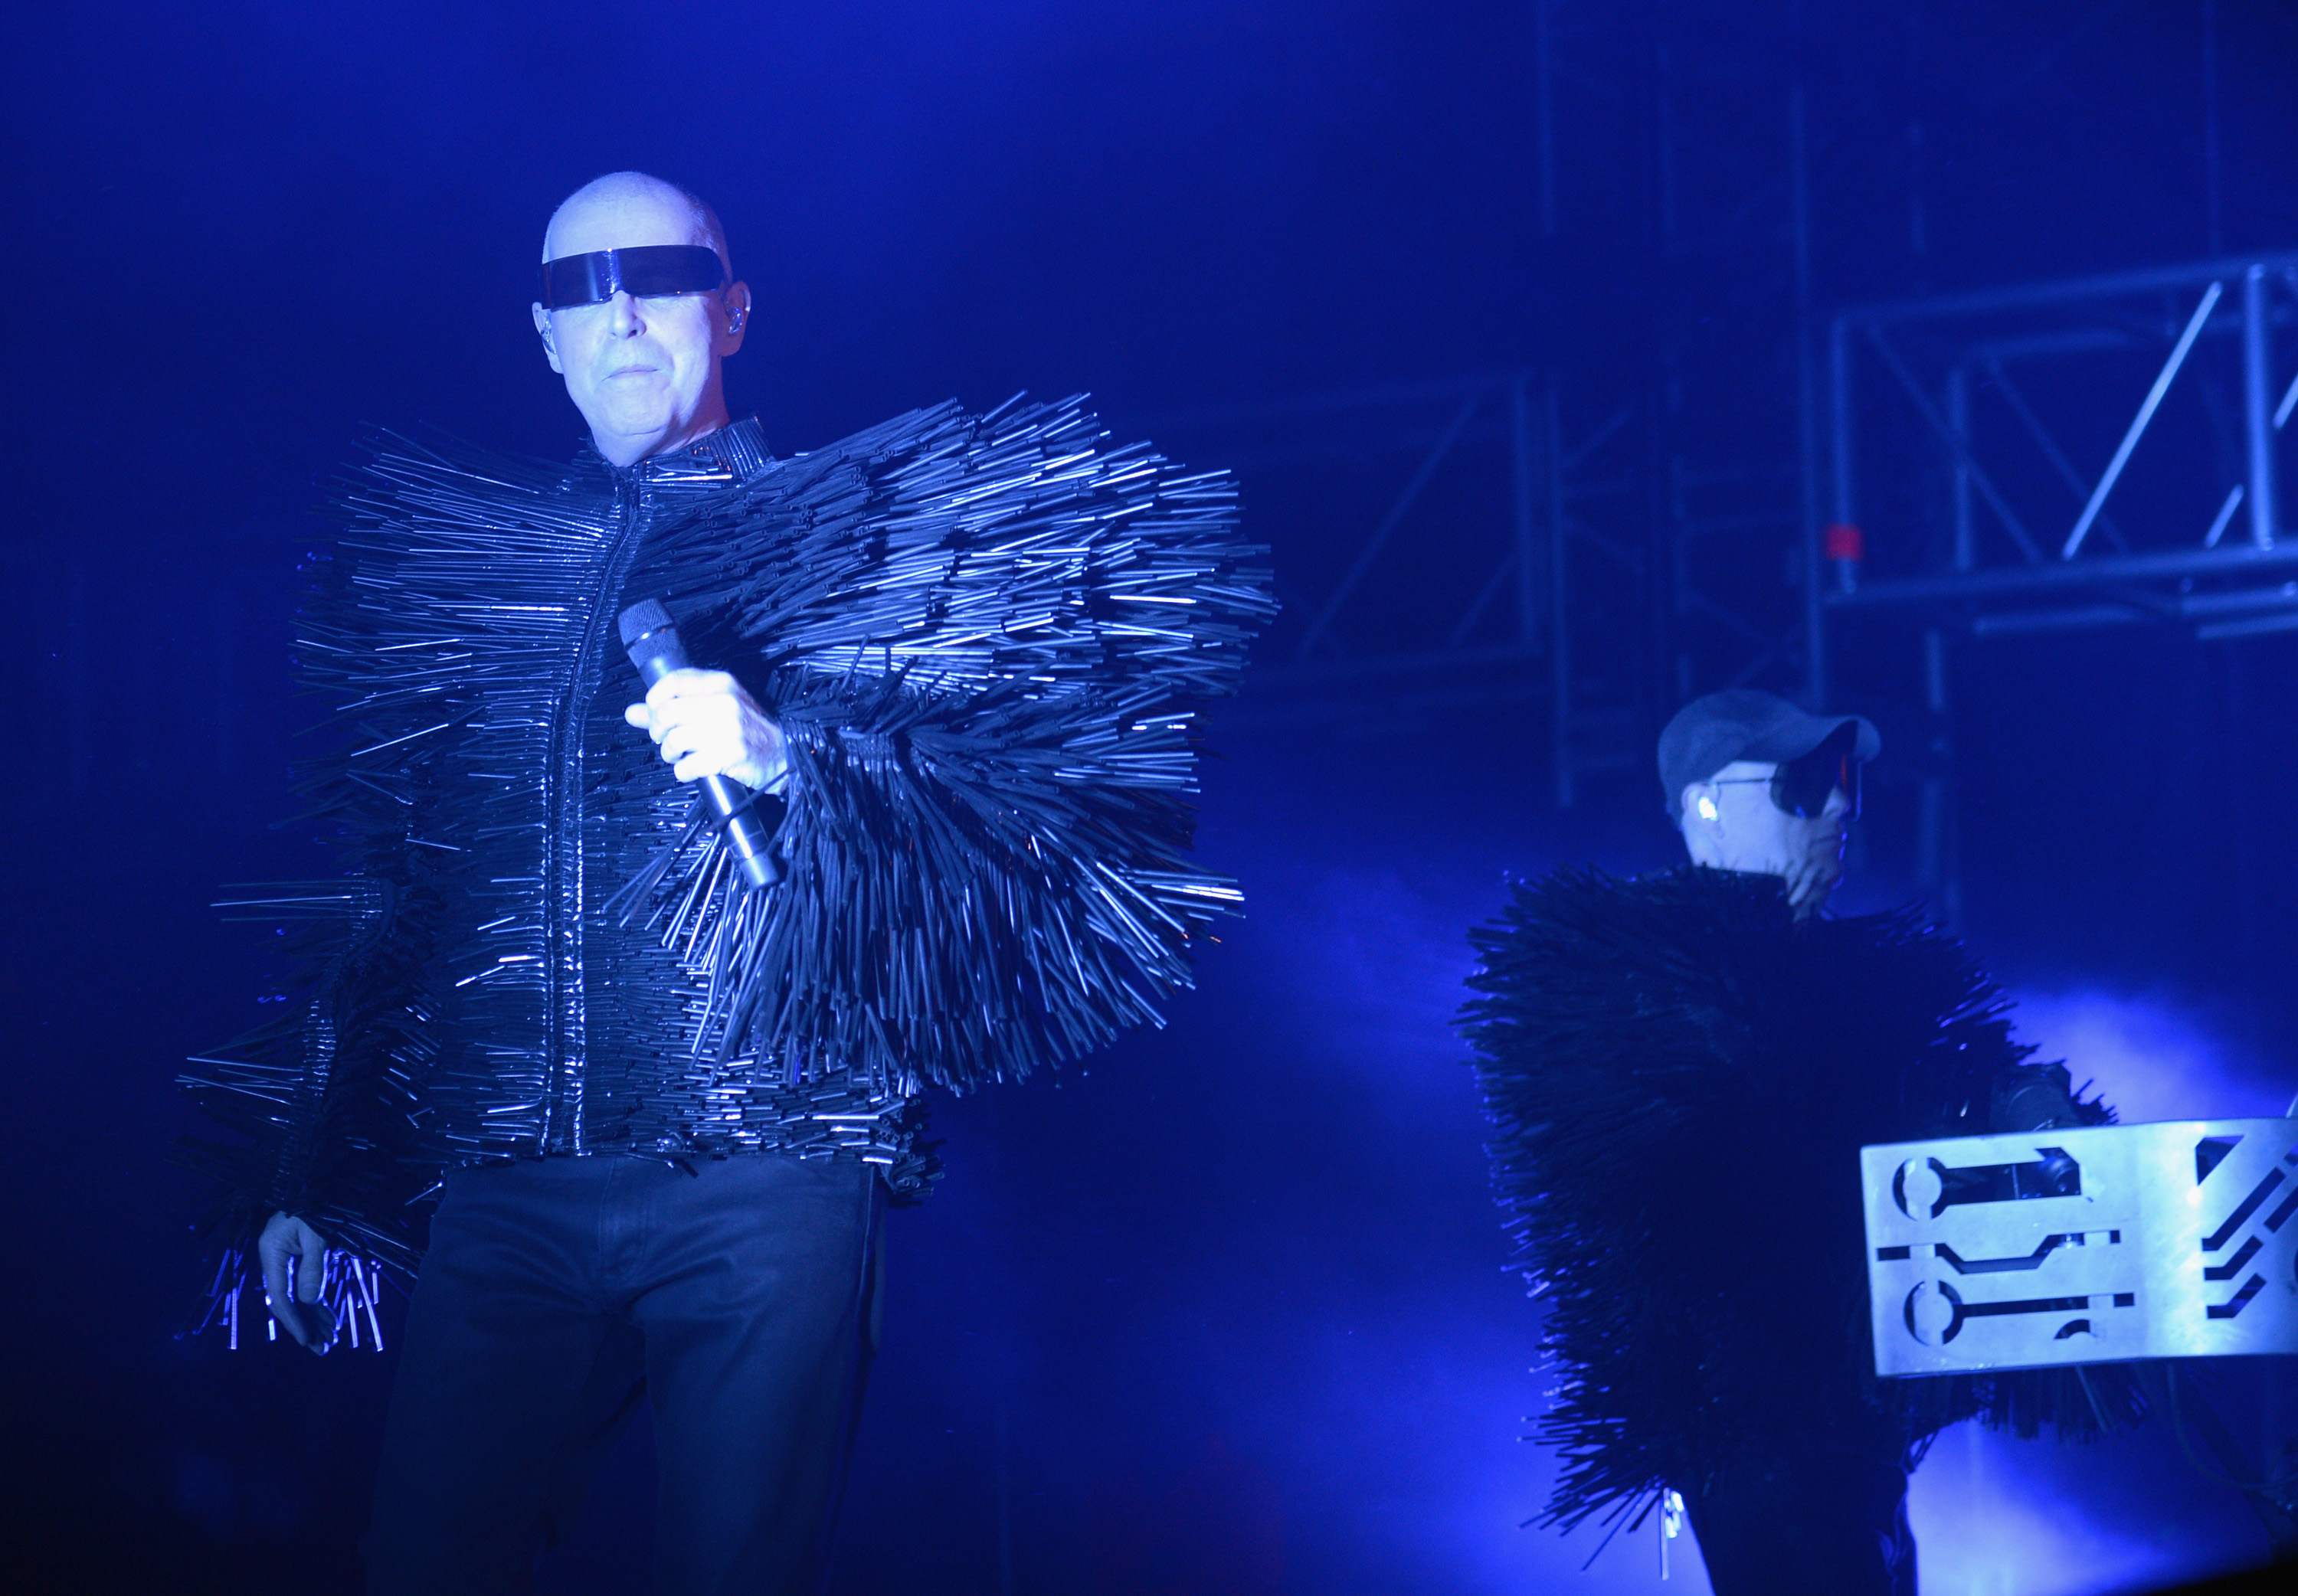 Pet Shop Boys at 2014 Coachella Valley Music and Arts Festival - Day 2